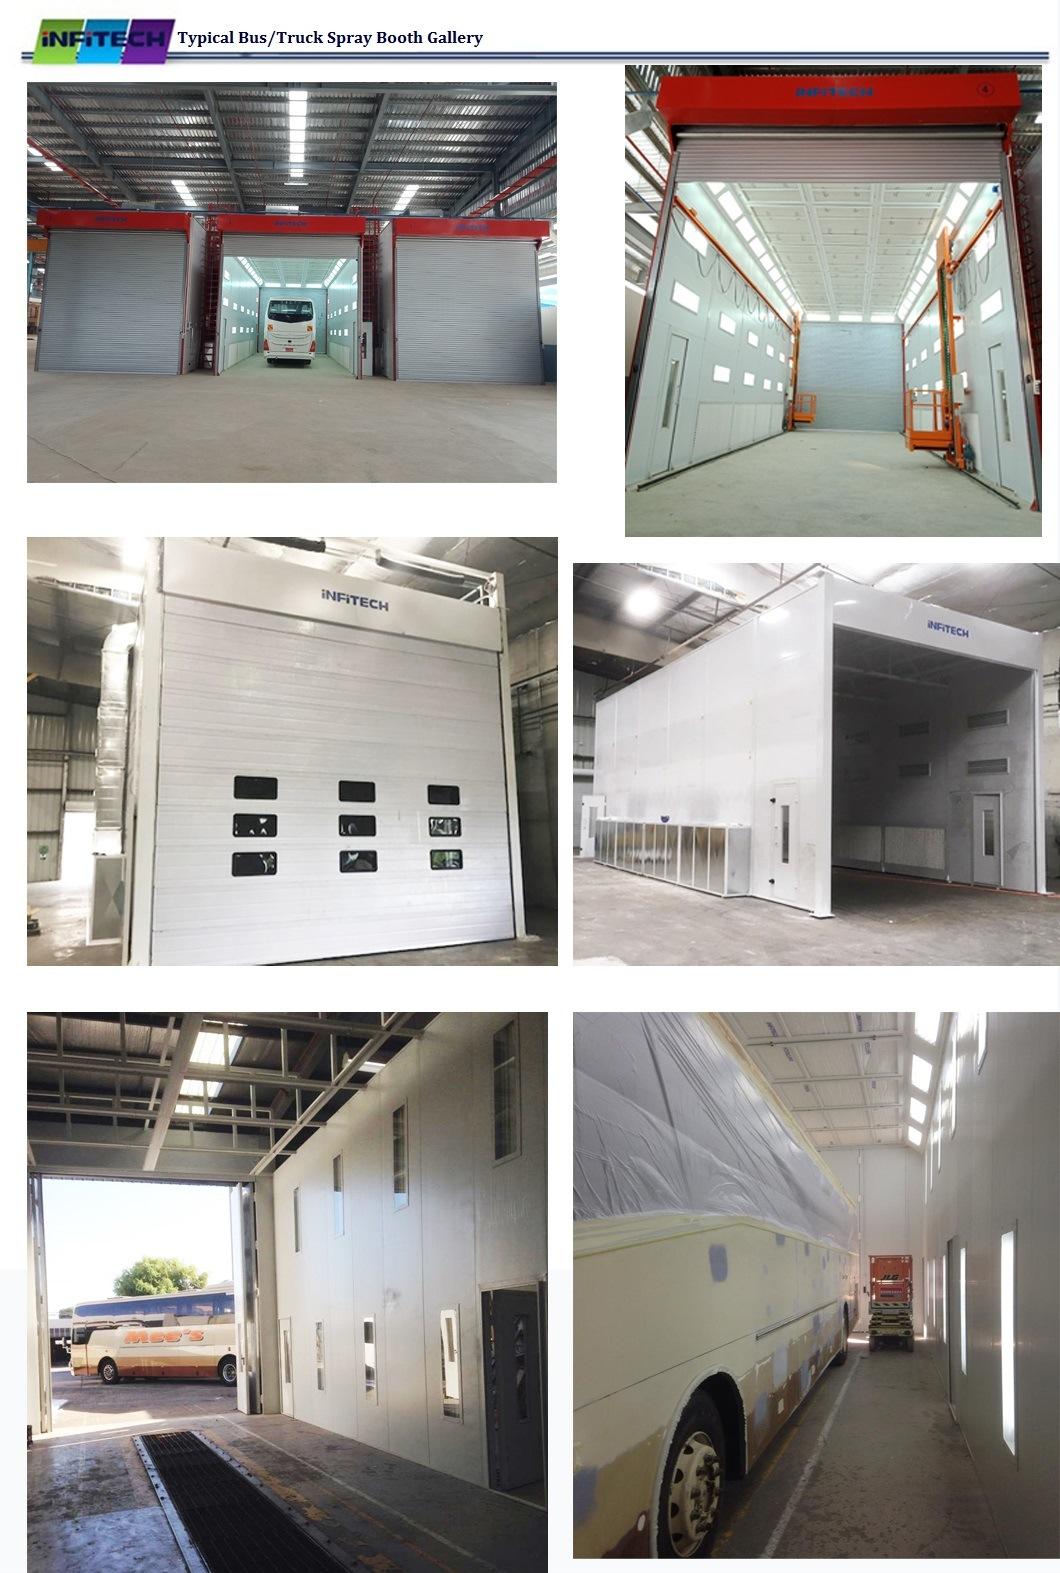 Bus Paint Booth/Bus Spray Booth/Truck Spray Booth with Riello Gas Burner